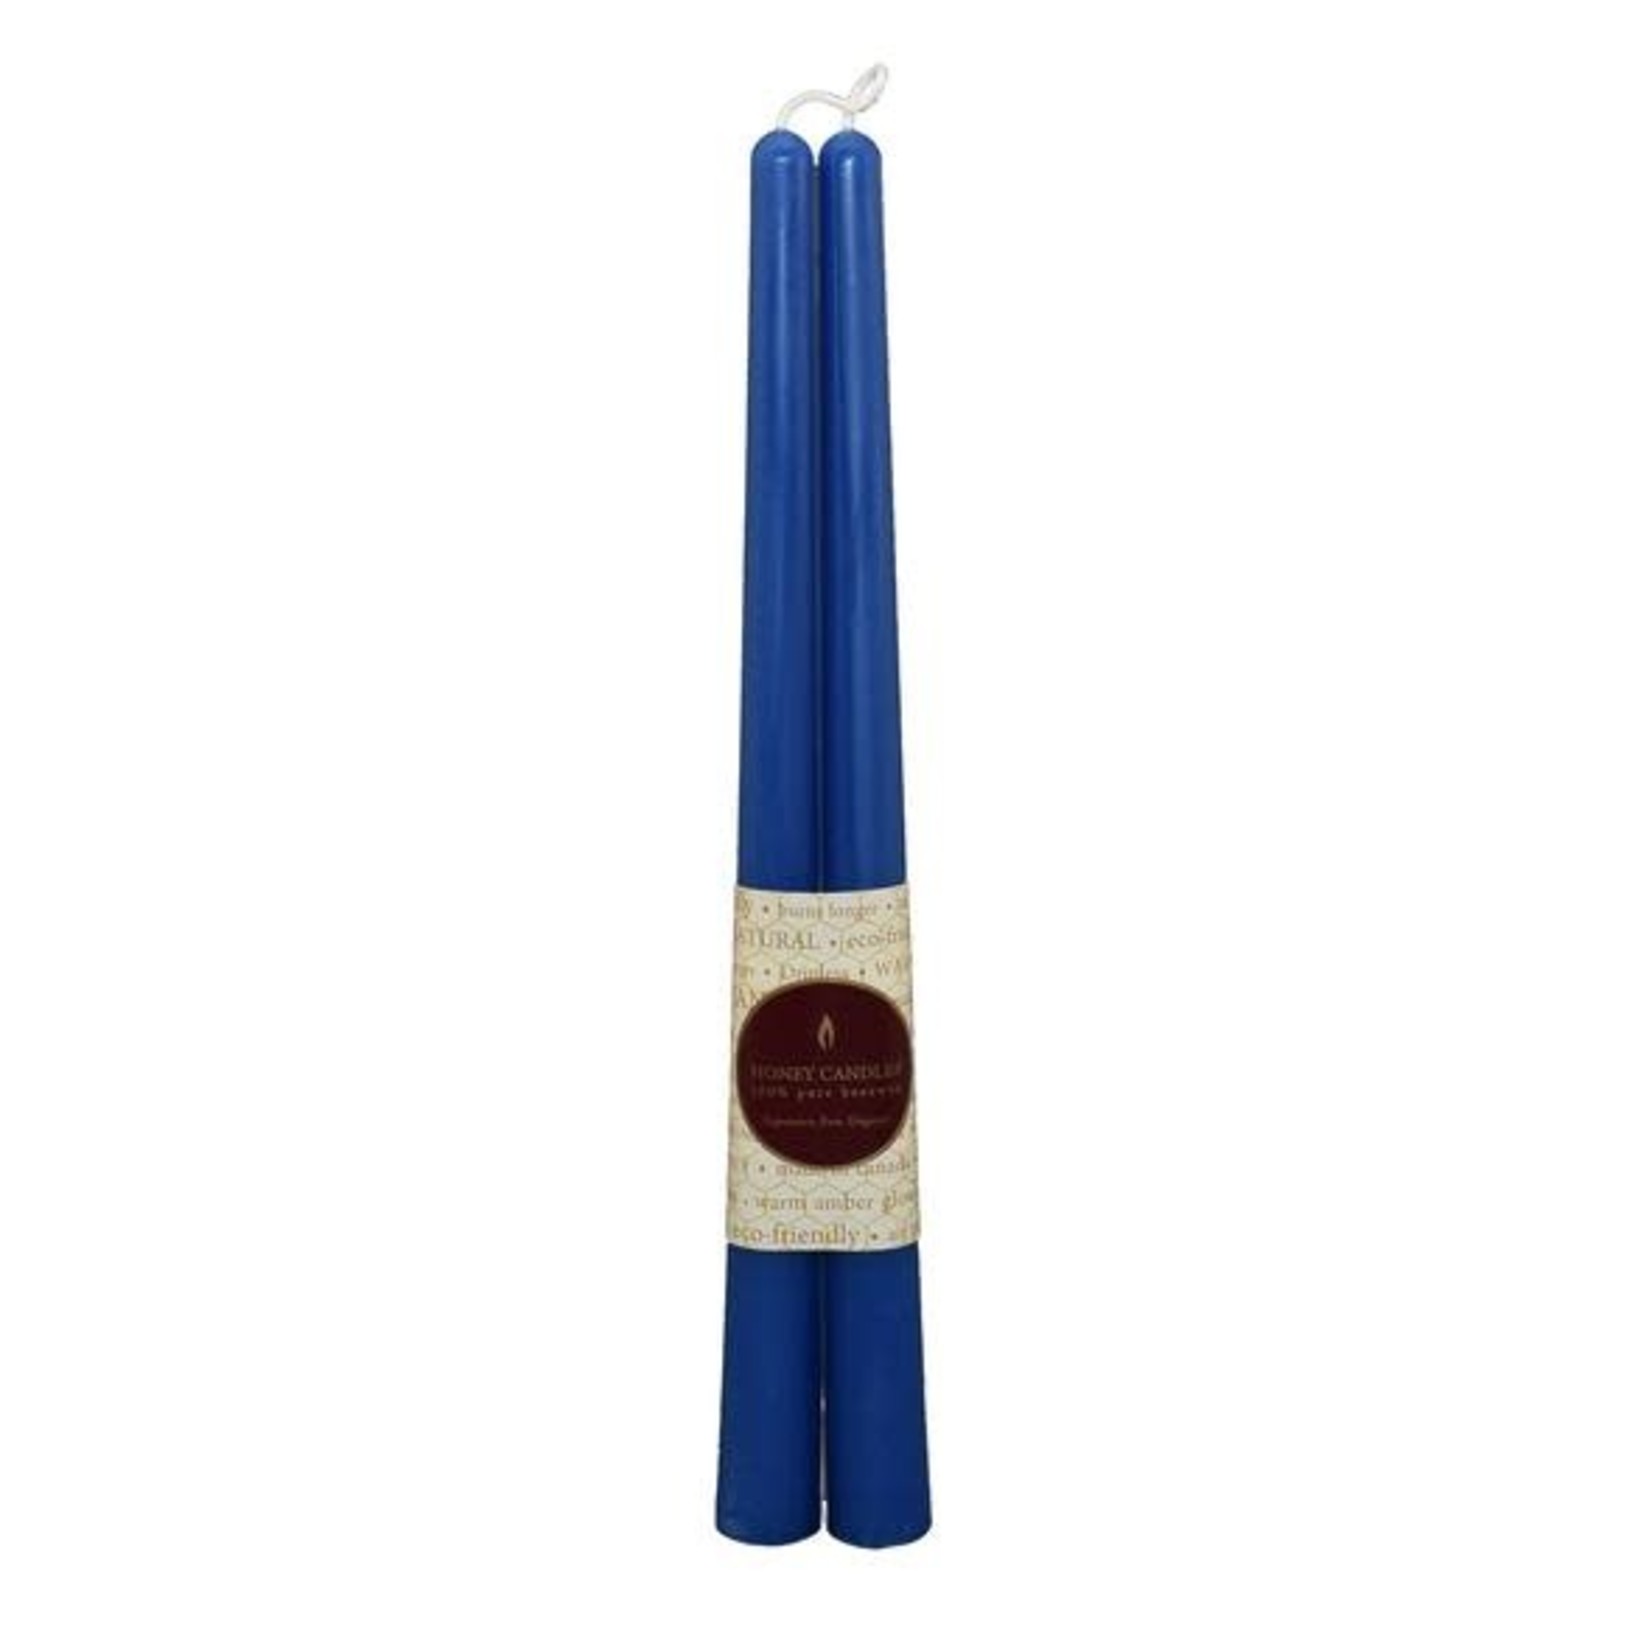 HONEY CANDLES 12" BEESWAX TAPER PAIR - BLUE